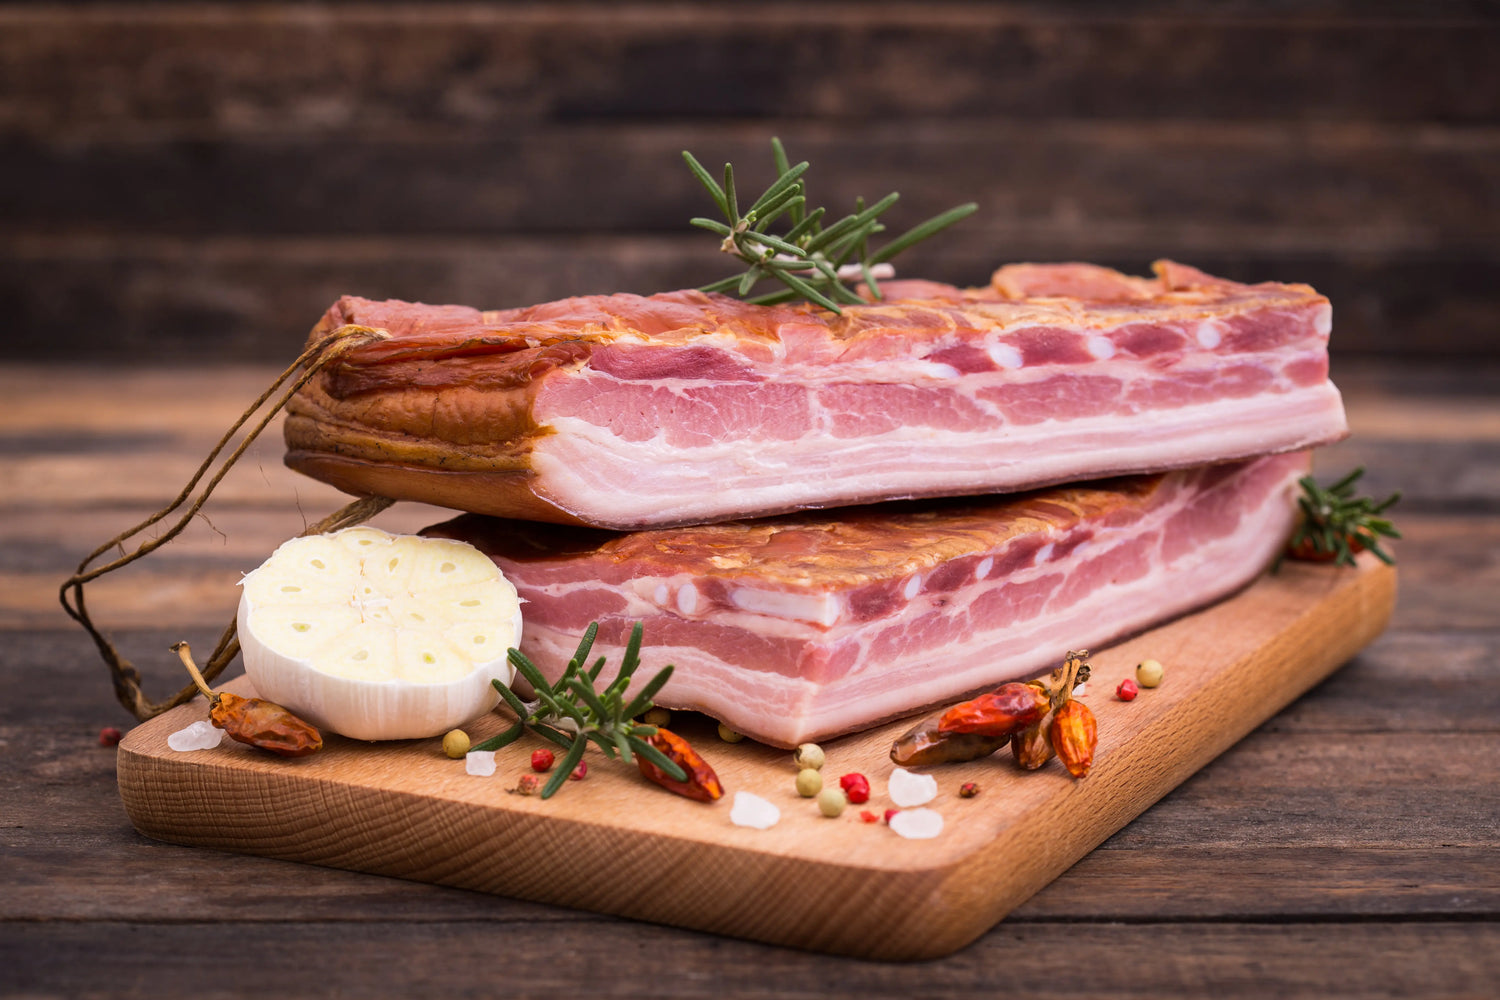 What Gives Bacon Its Traditional Smoky Flavor?